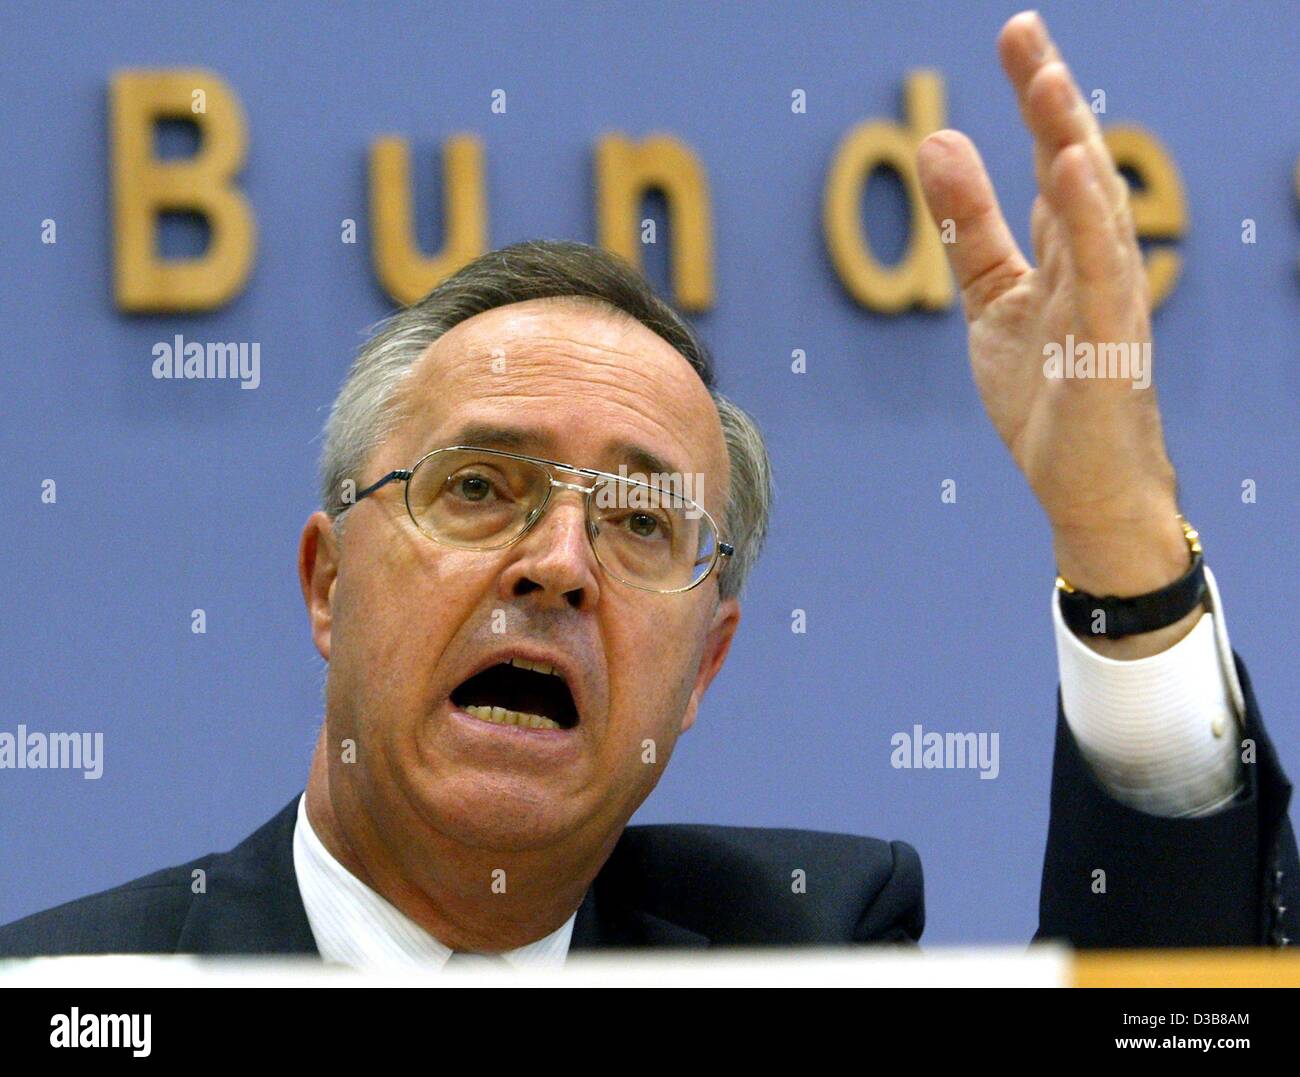 (dpa) - German Finance Minister Hans Eichel (SPD) speaks and gestures at a press conference on the tax estimation for 2002 and 2003, Berlin, 13 November 2002. Tax failure is expected to be 37 billion euros, stated the Tax Estimation Commission. Germany will exceed the 3 percent spending cap and brea Stock Photo